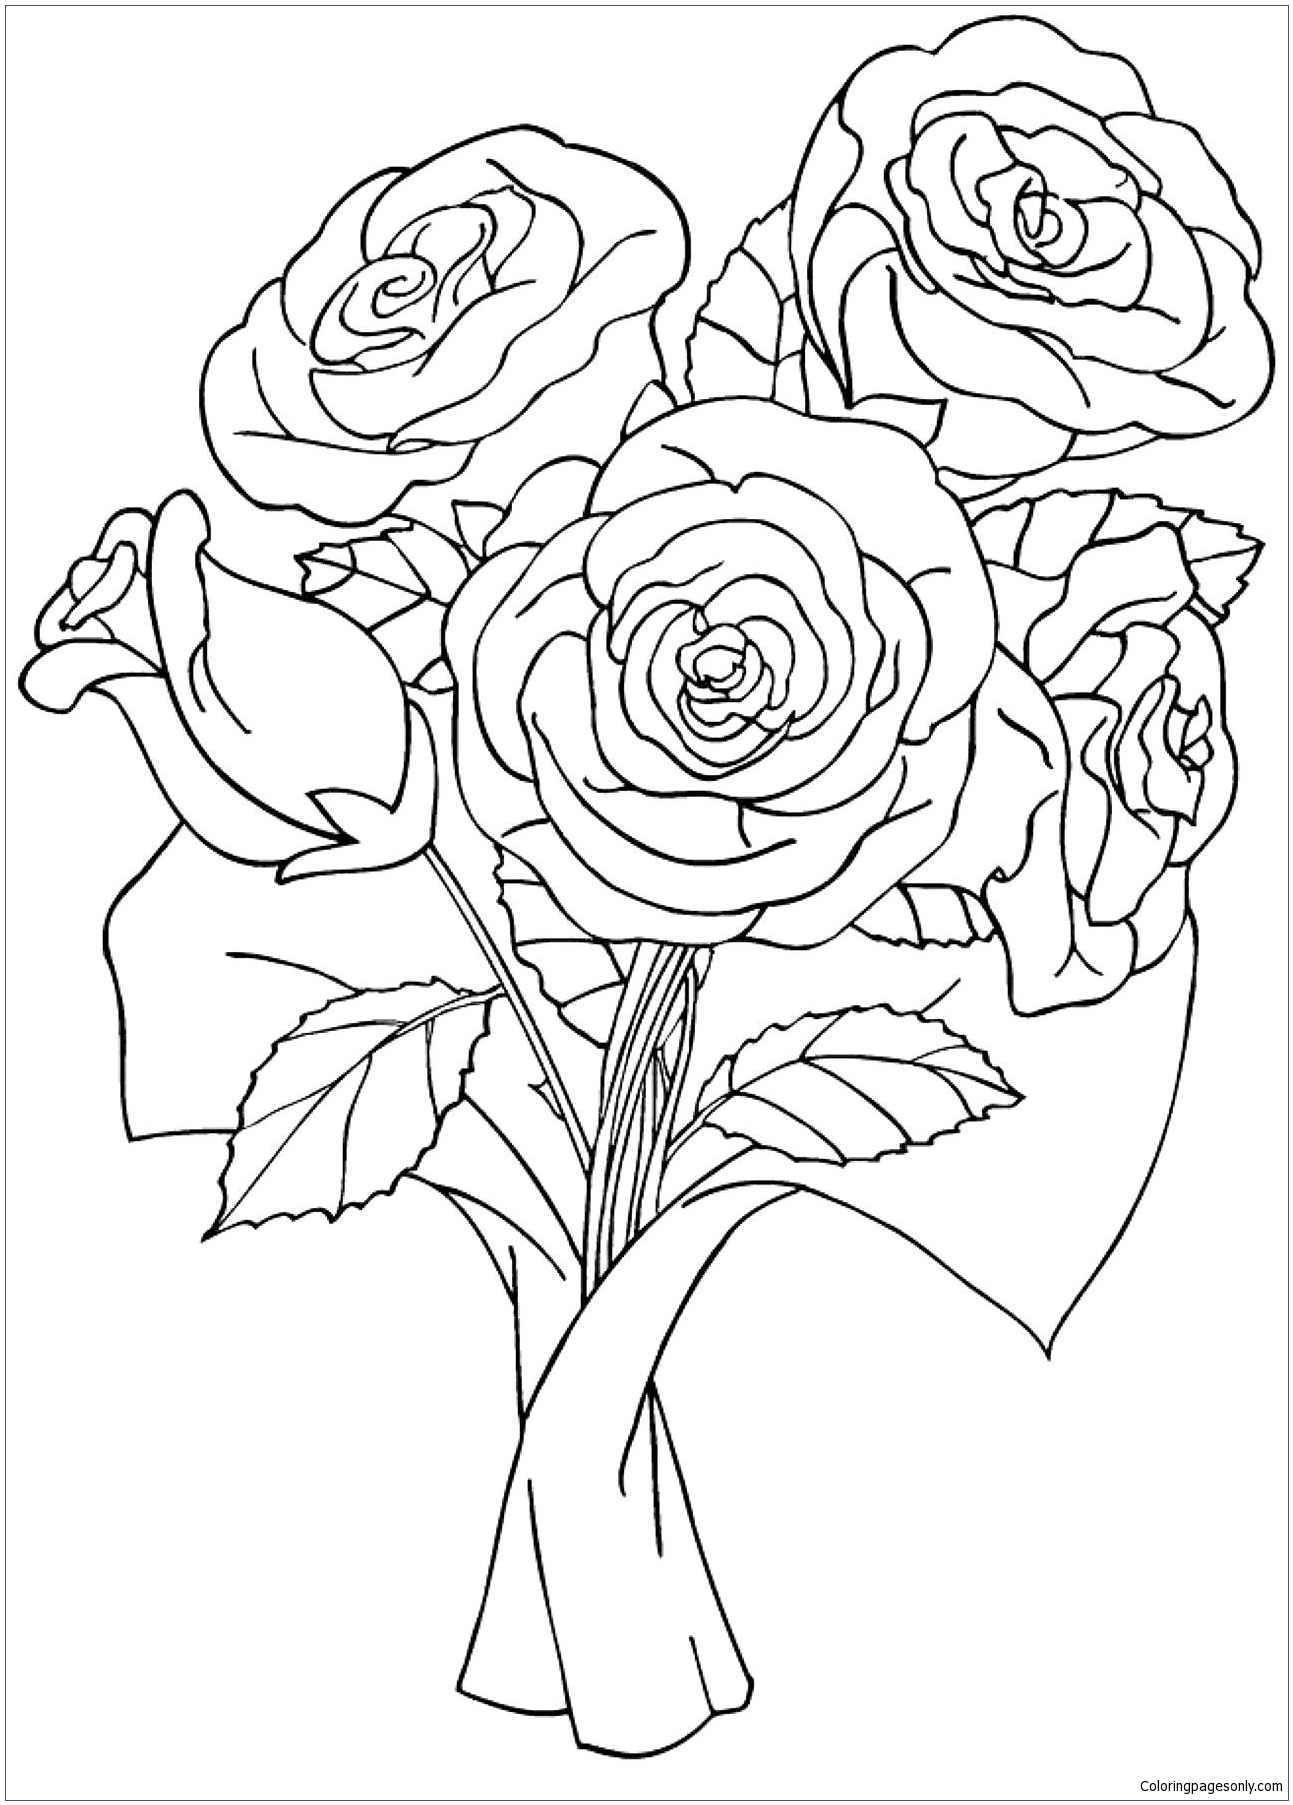 Roses Flower Coloring Page Free Coloring Pages Online